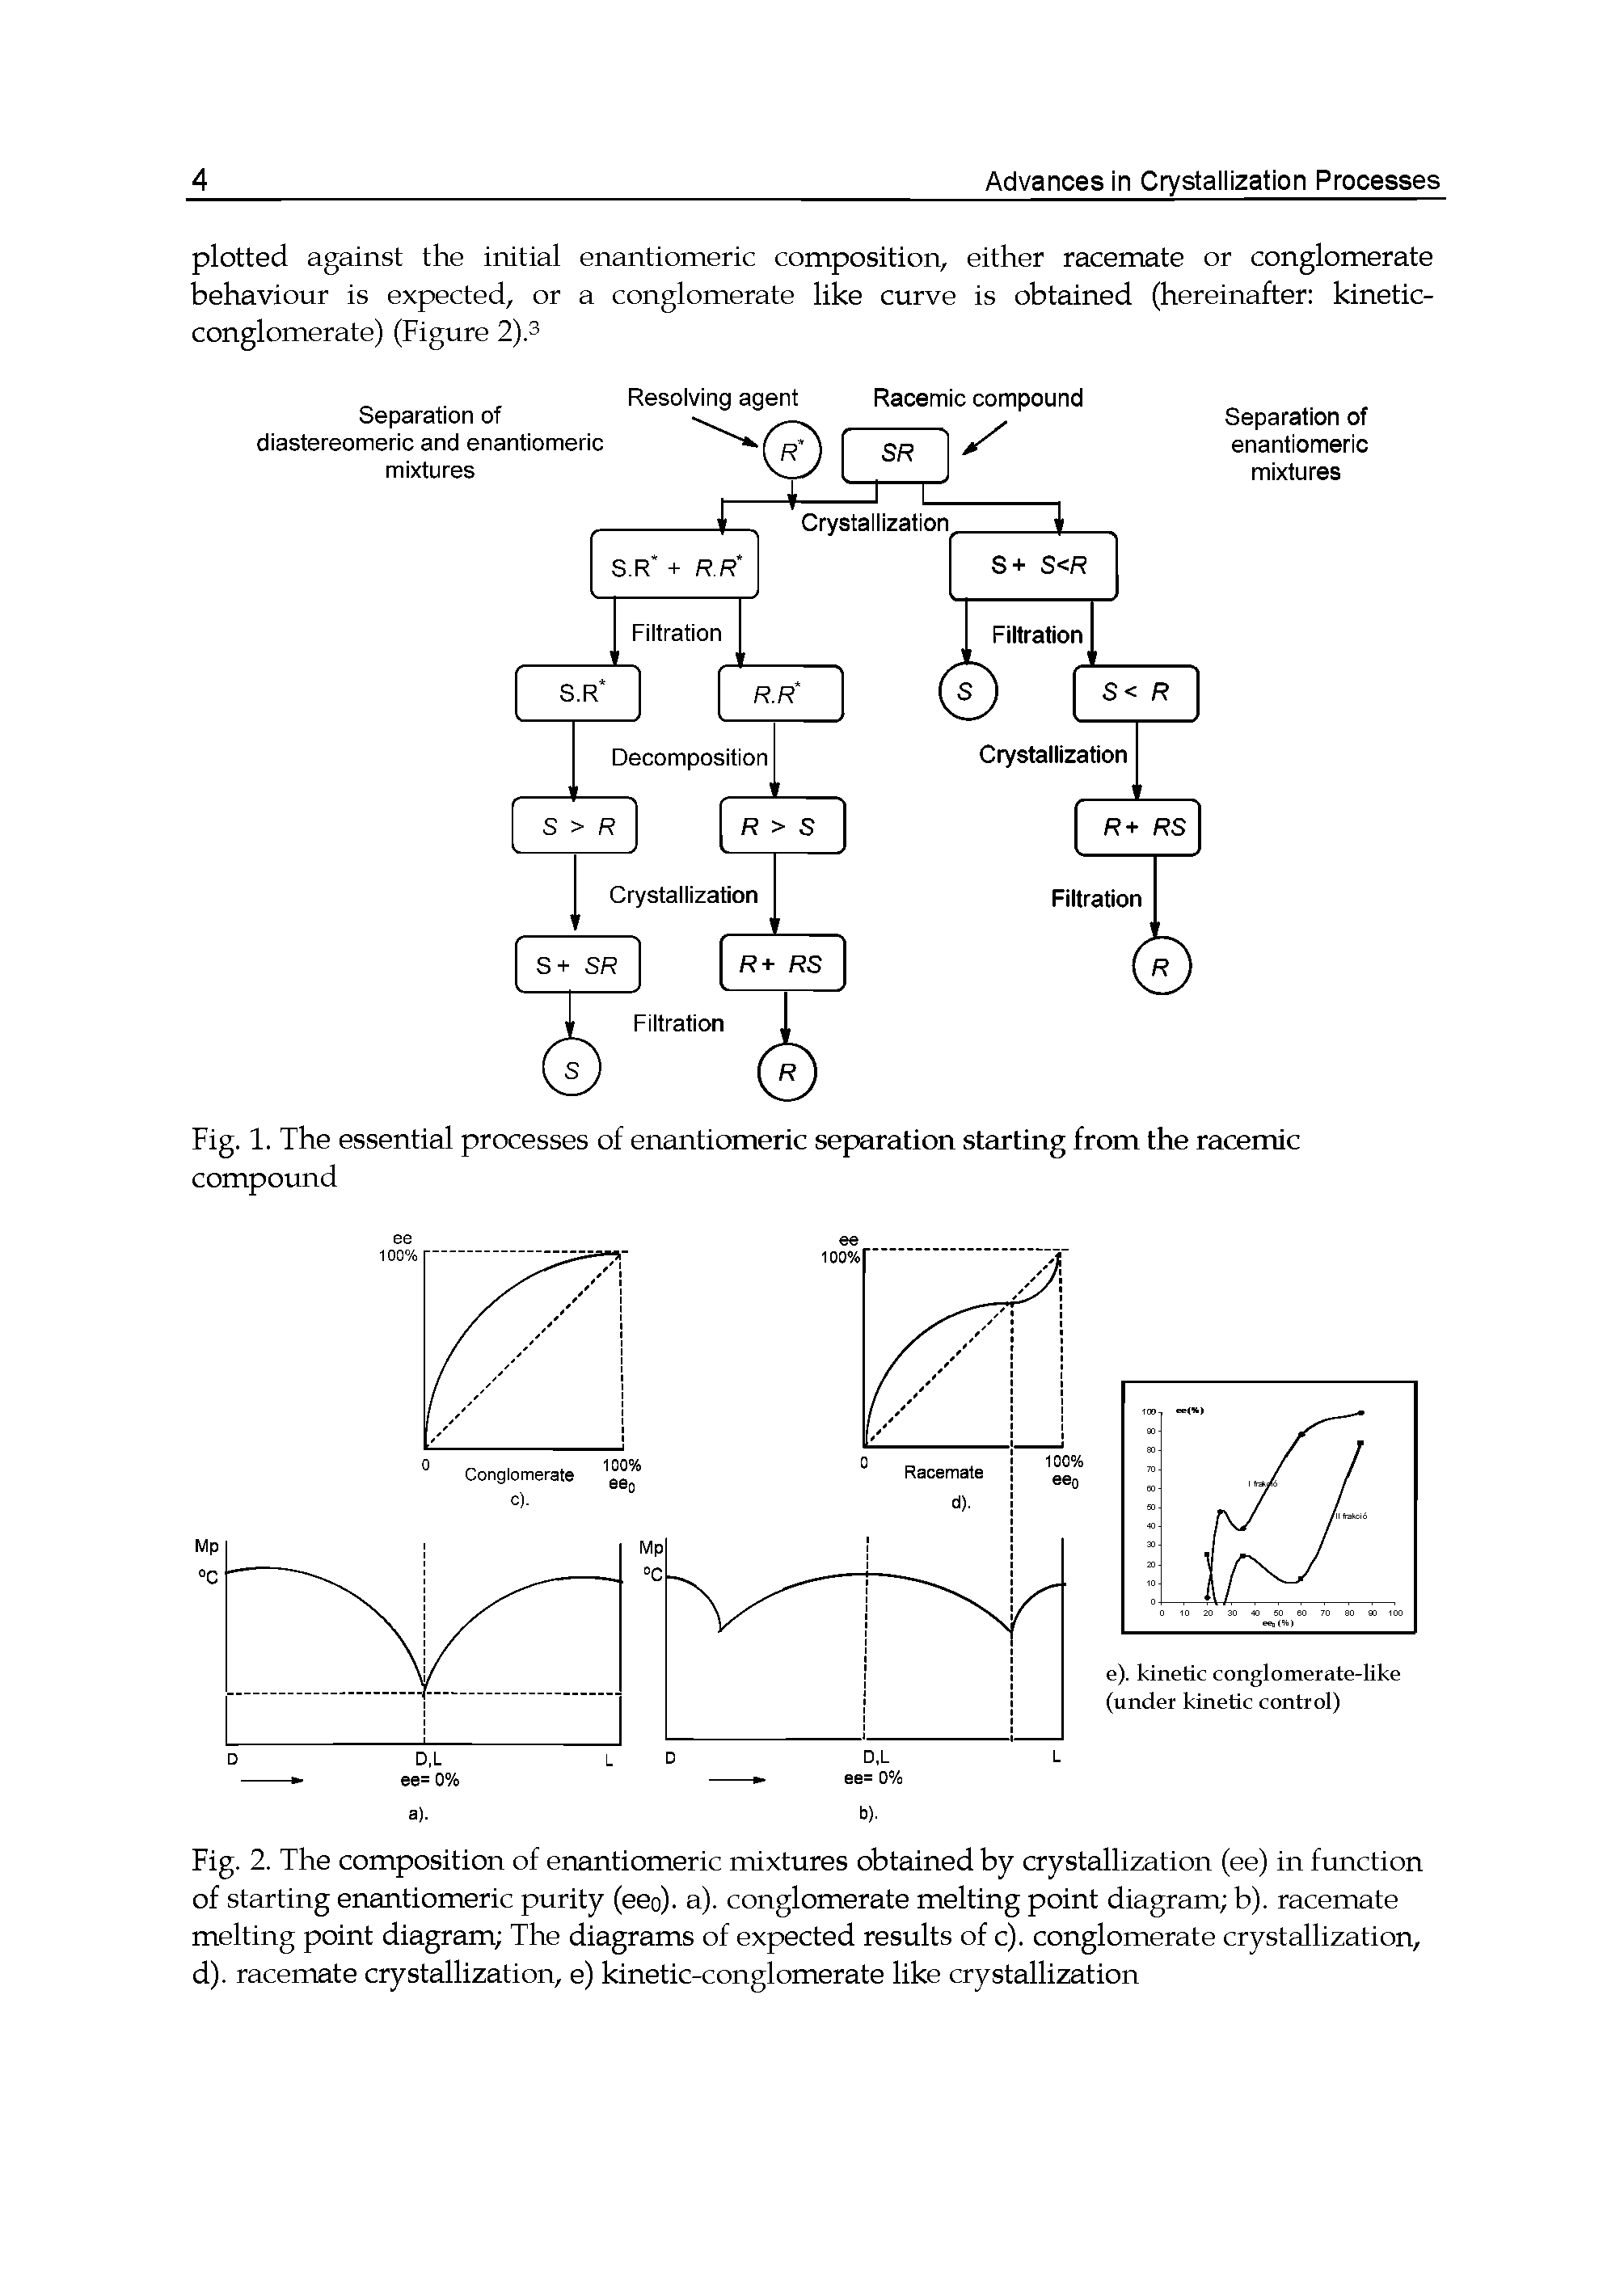 Fig. 2. The composition of enantiomeric mixtures obtained by crystallization (ee) in fimction of starting enantiomeric purity (eeo). a), conglomerate melting point diagram b). racemate melting point diagram The diagrams of expected results of c). conglomerate crystallization, d). racemate crystallization, e) kinetic-conglomerate like crystallization...